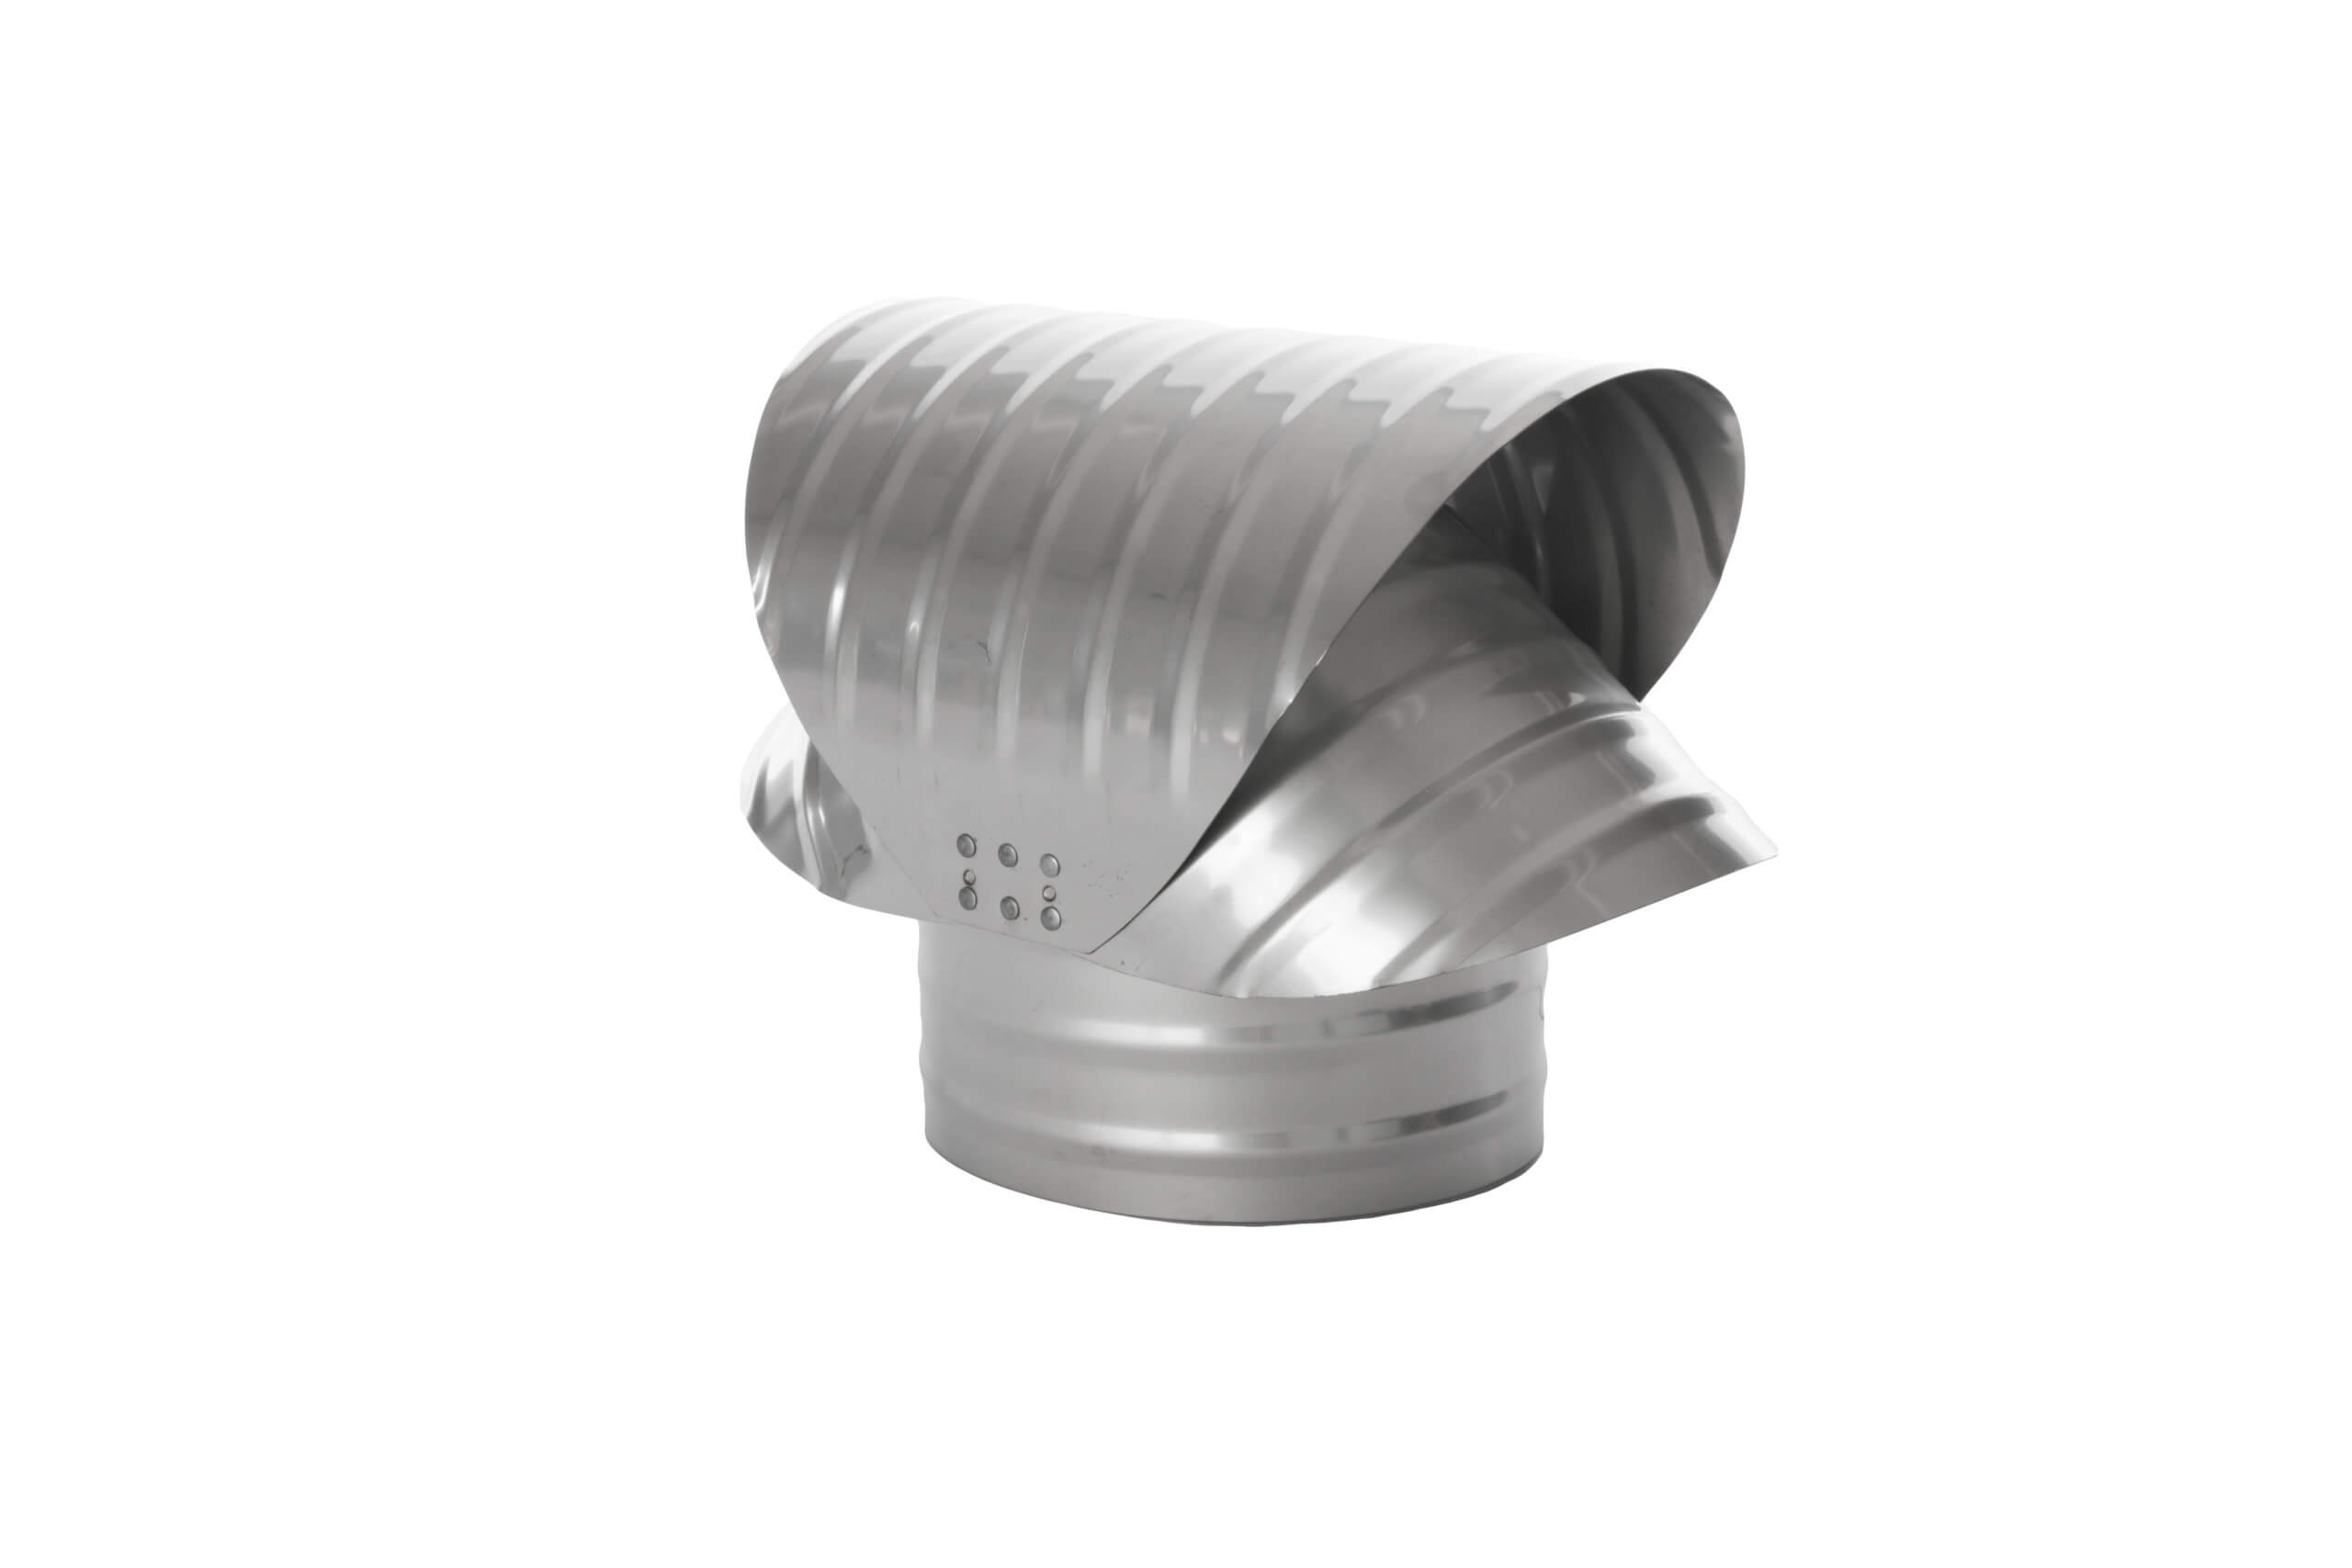 Side view of FAMCO Round Base Chimney Vacuum Cap in stainless steel.